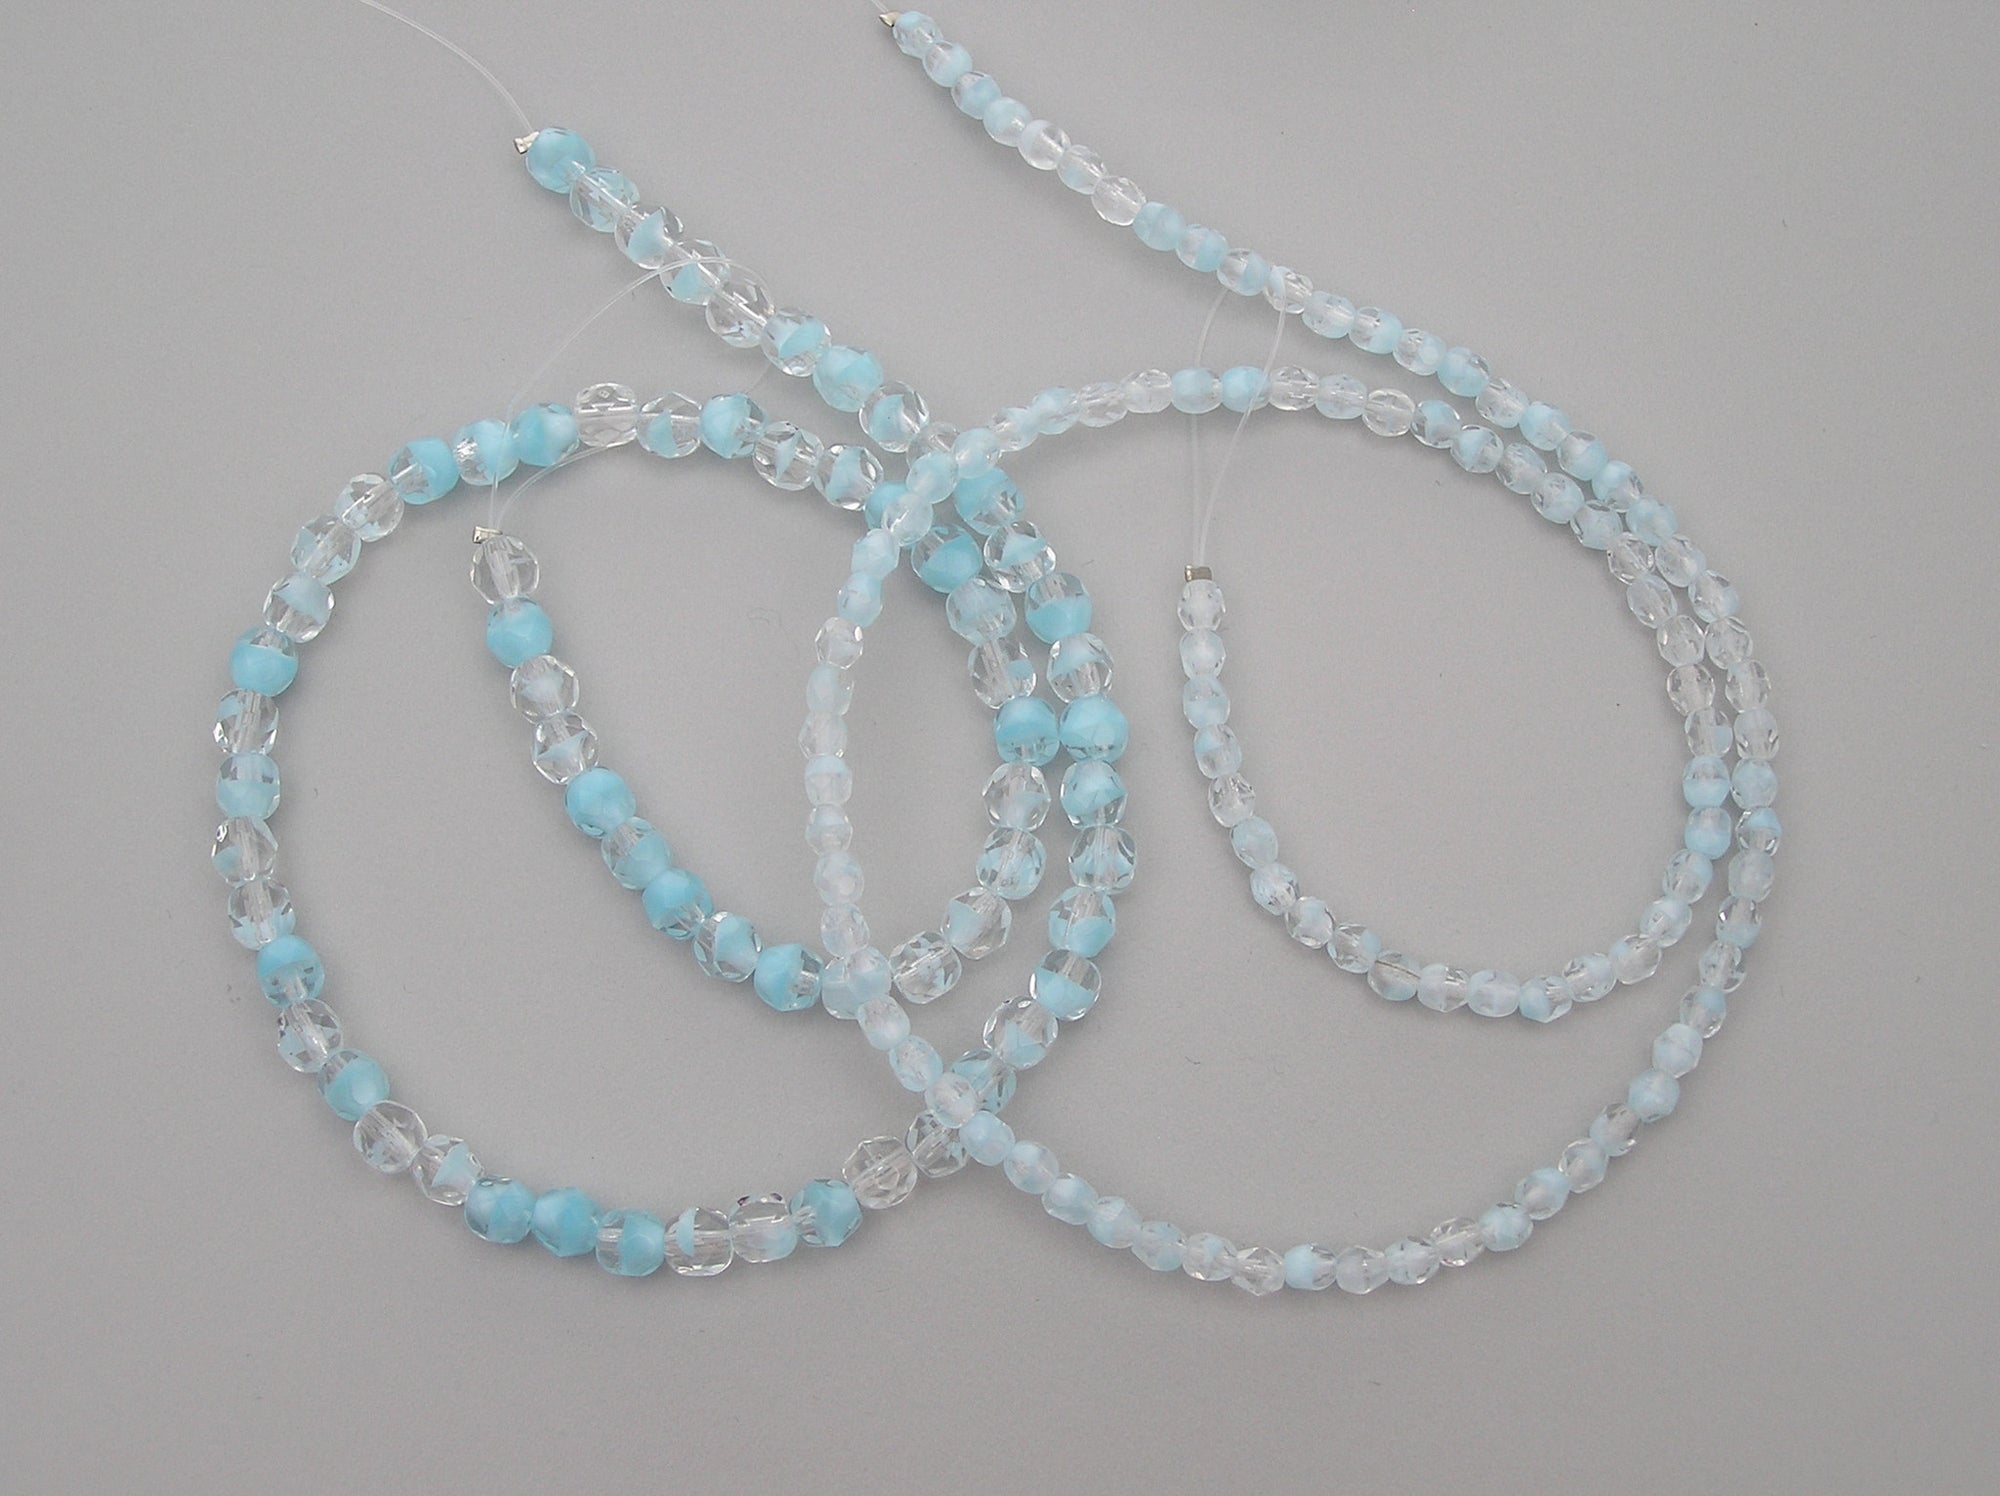 Crystal Light Blue Givre, 2-tone combination, Czech Fire Polished Round Faceted Glass Beads, 7 inch strands